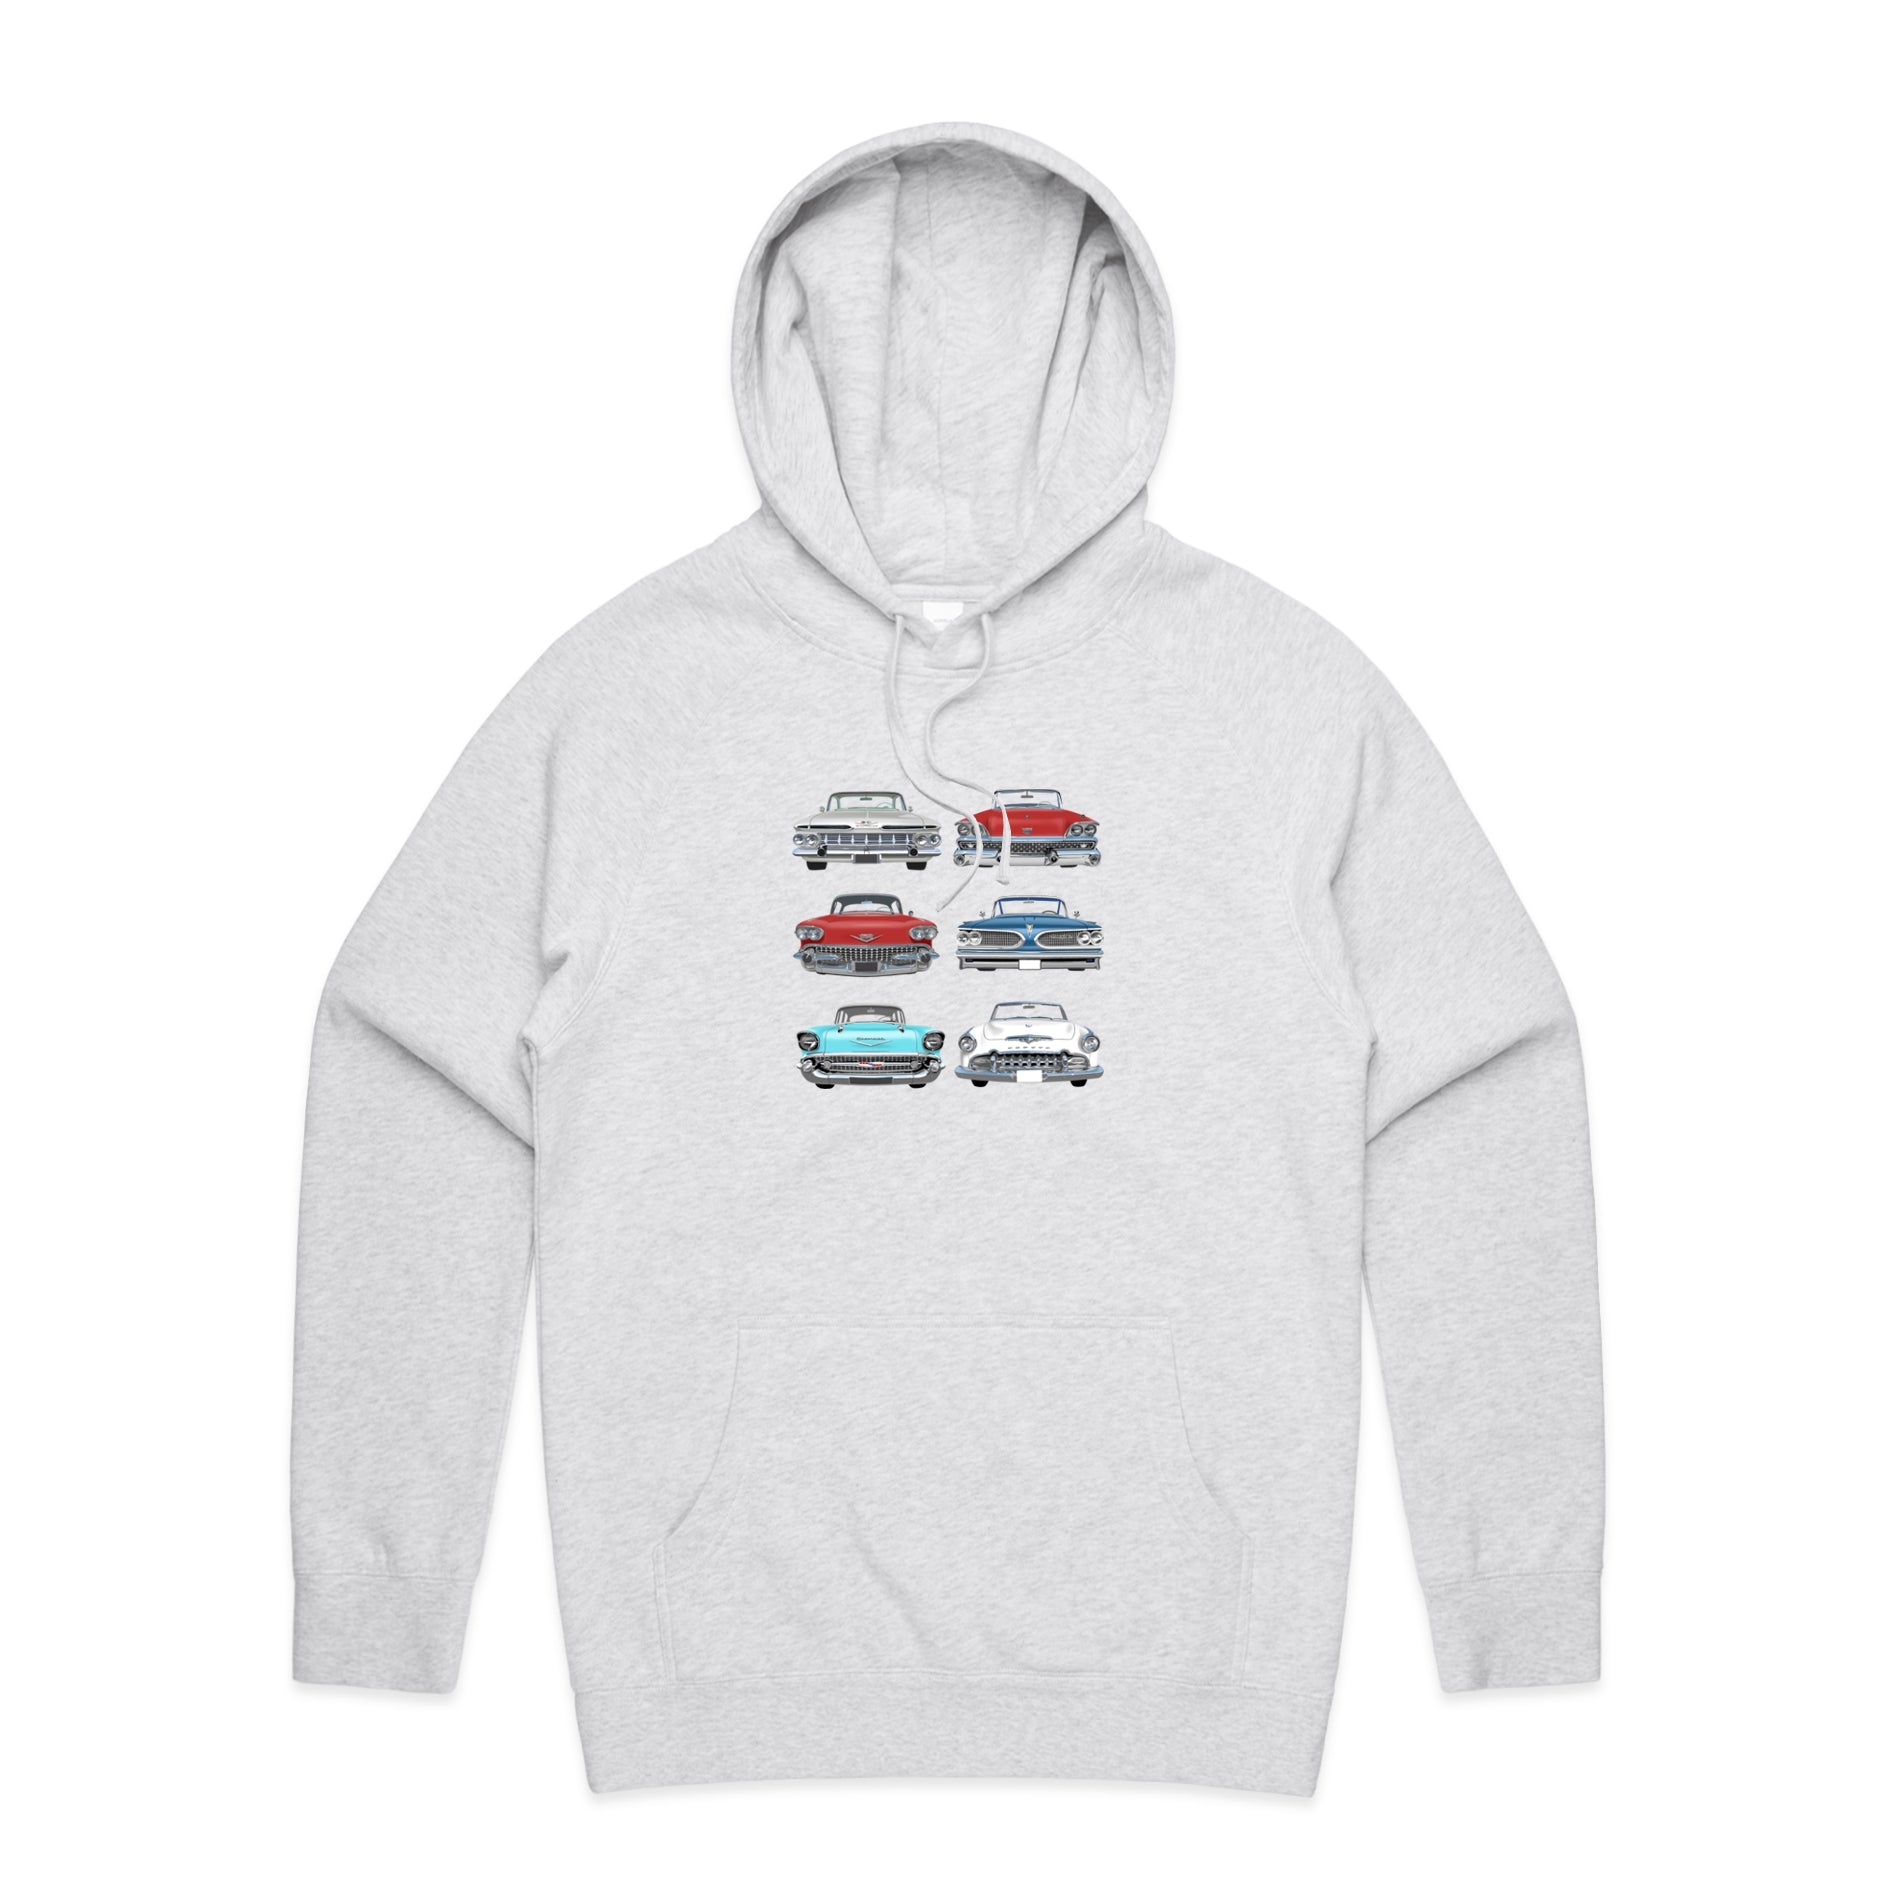 Isthatso - Car Grills USA Classic Hoody - White Marle